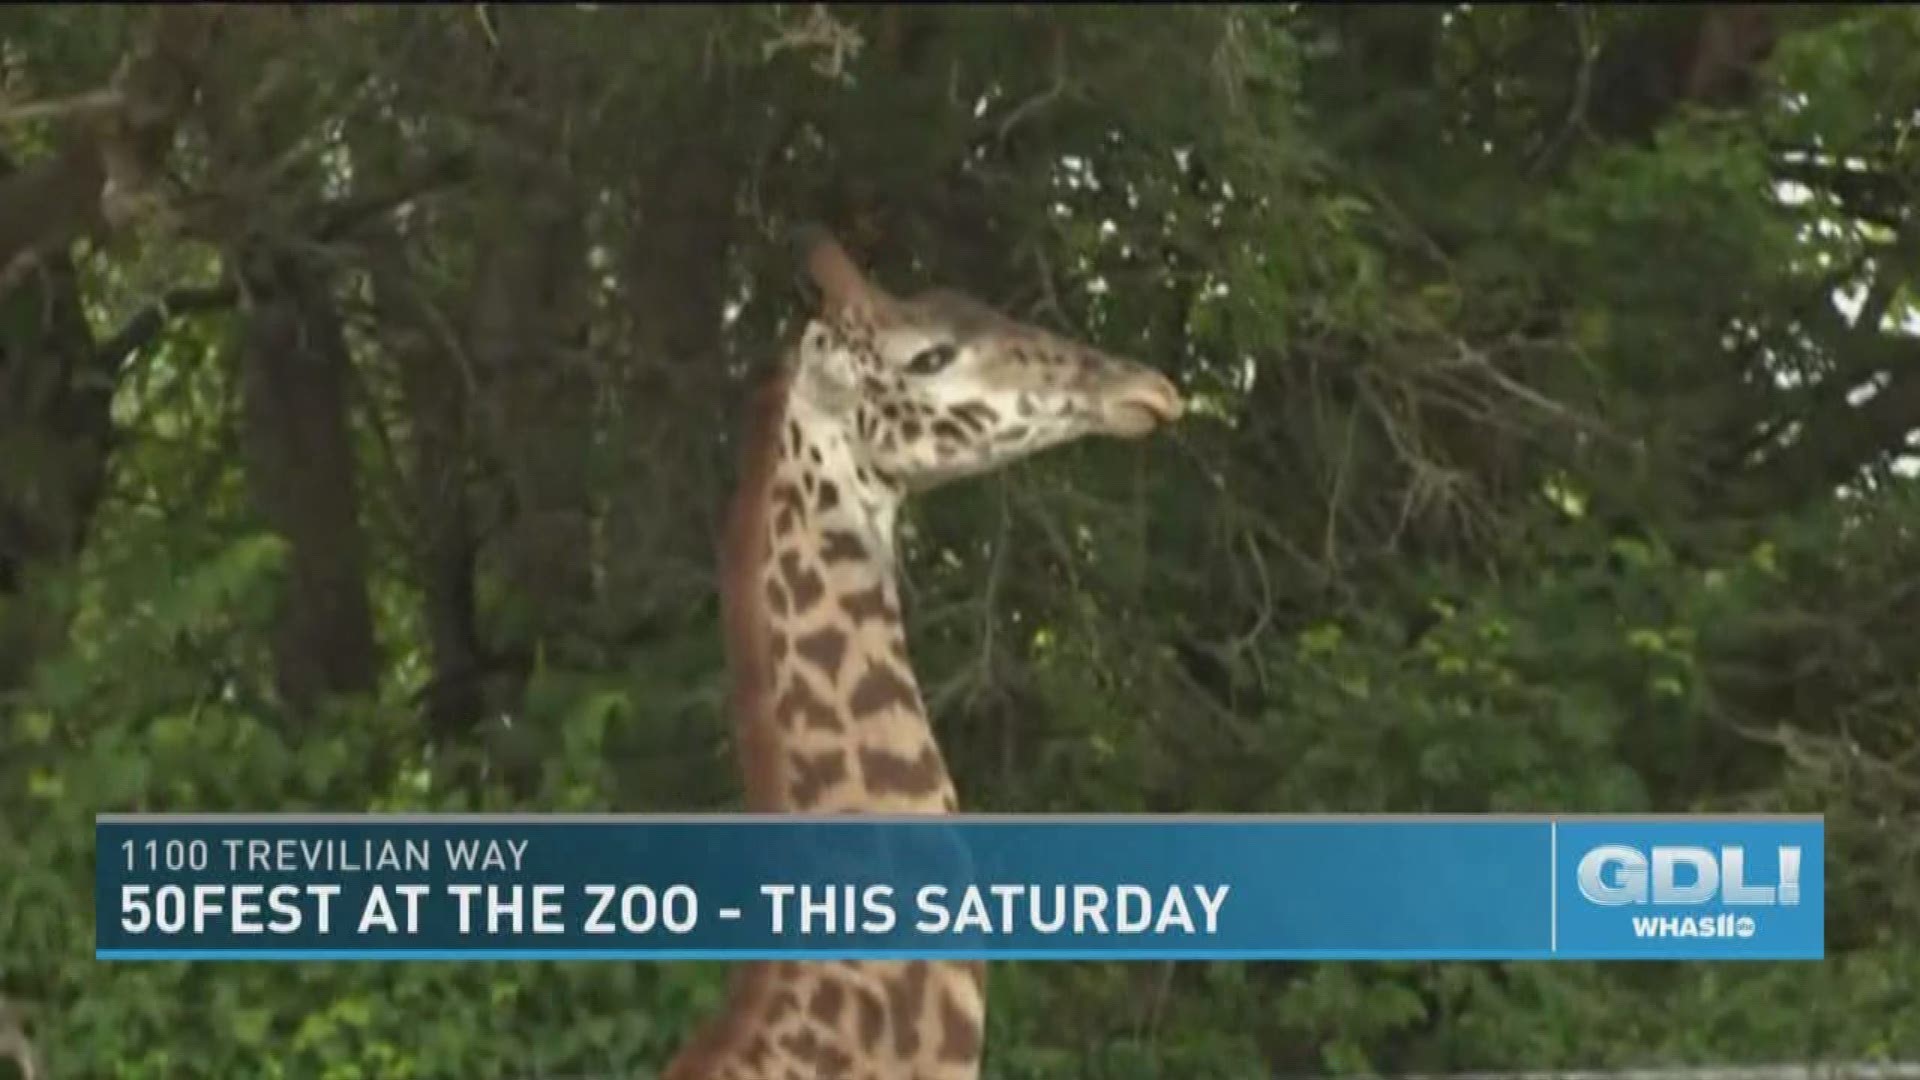 The Louisville Zoo is holding 50Fest to celebrate its 50th anniversary. You can take part in the festivities on May 18-19, 2019 at the Louisville Zoo, which is located at 1100 Trevilian Way in Louisville, KY.